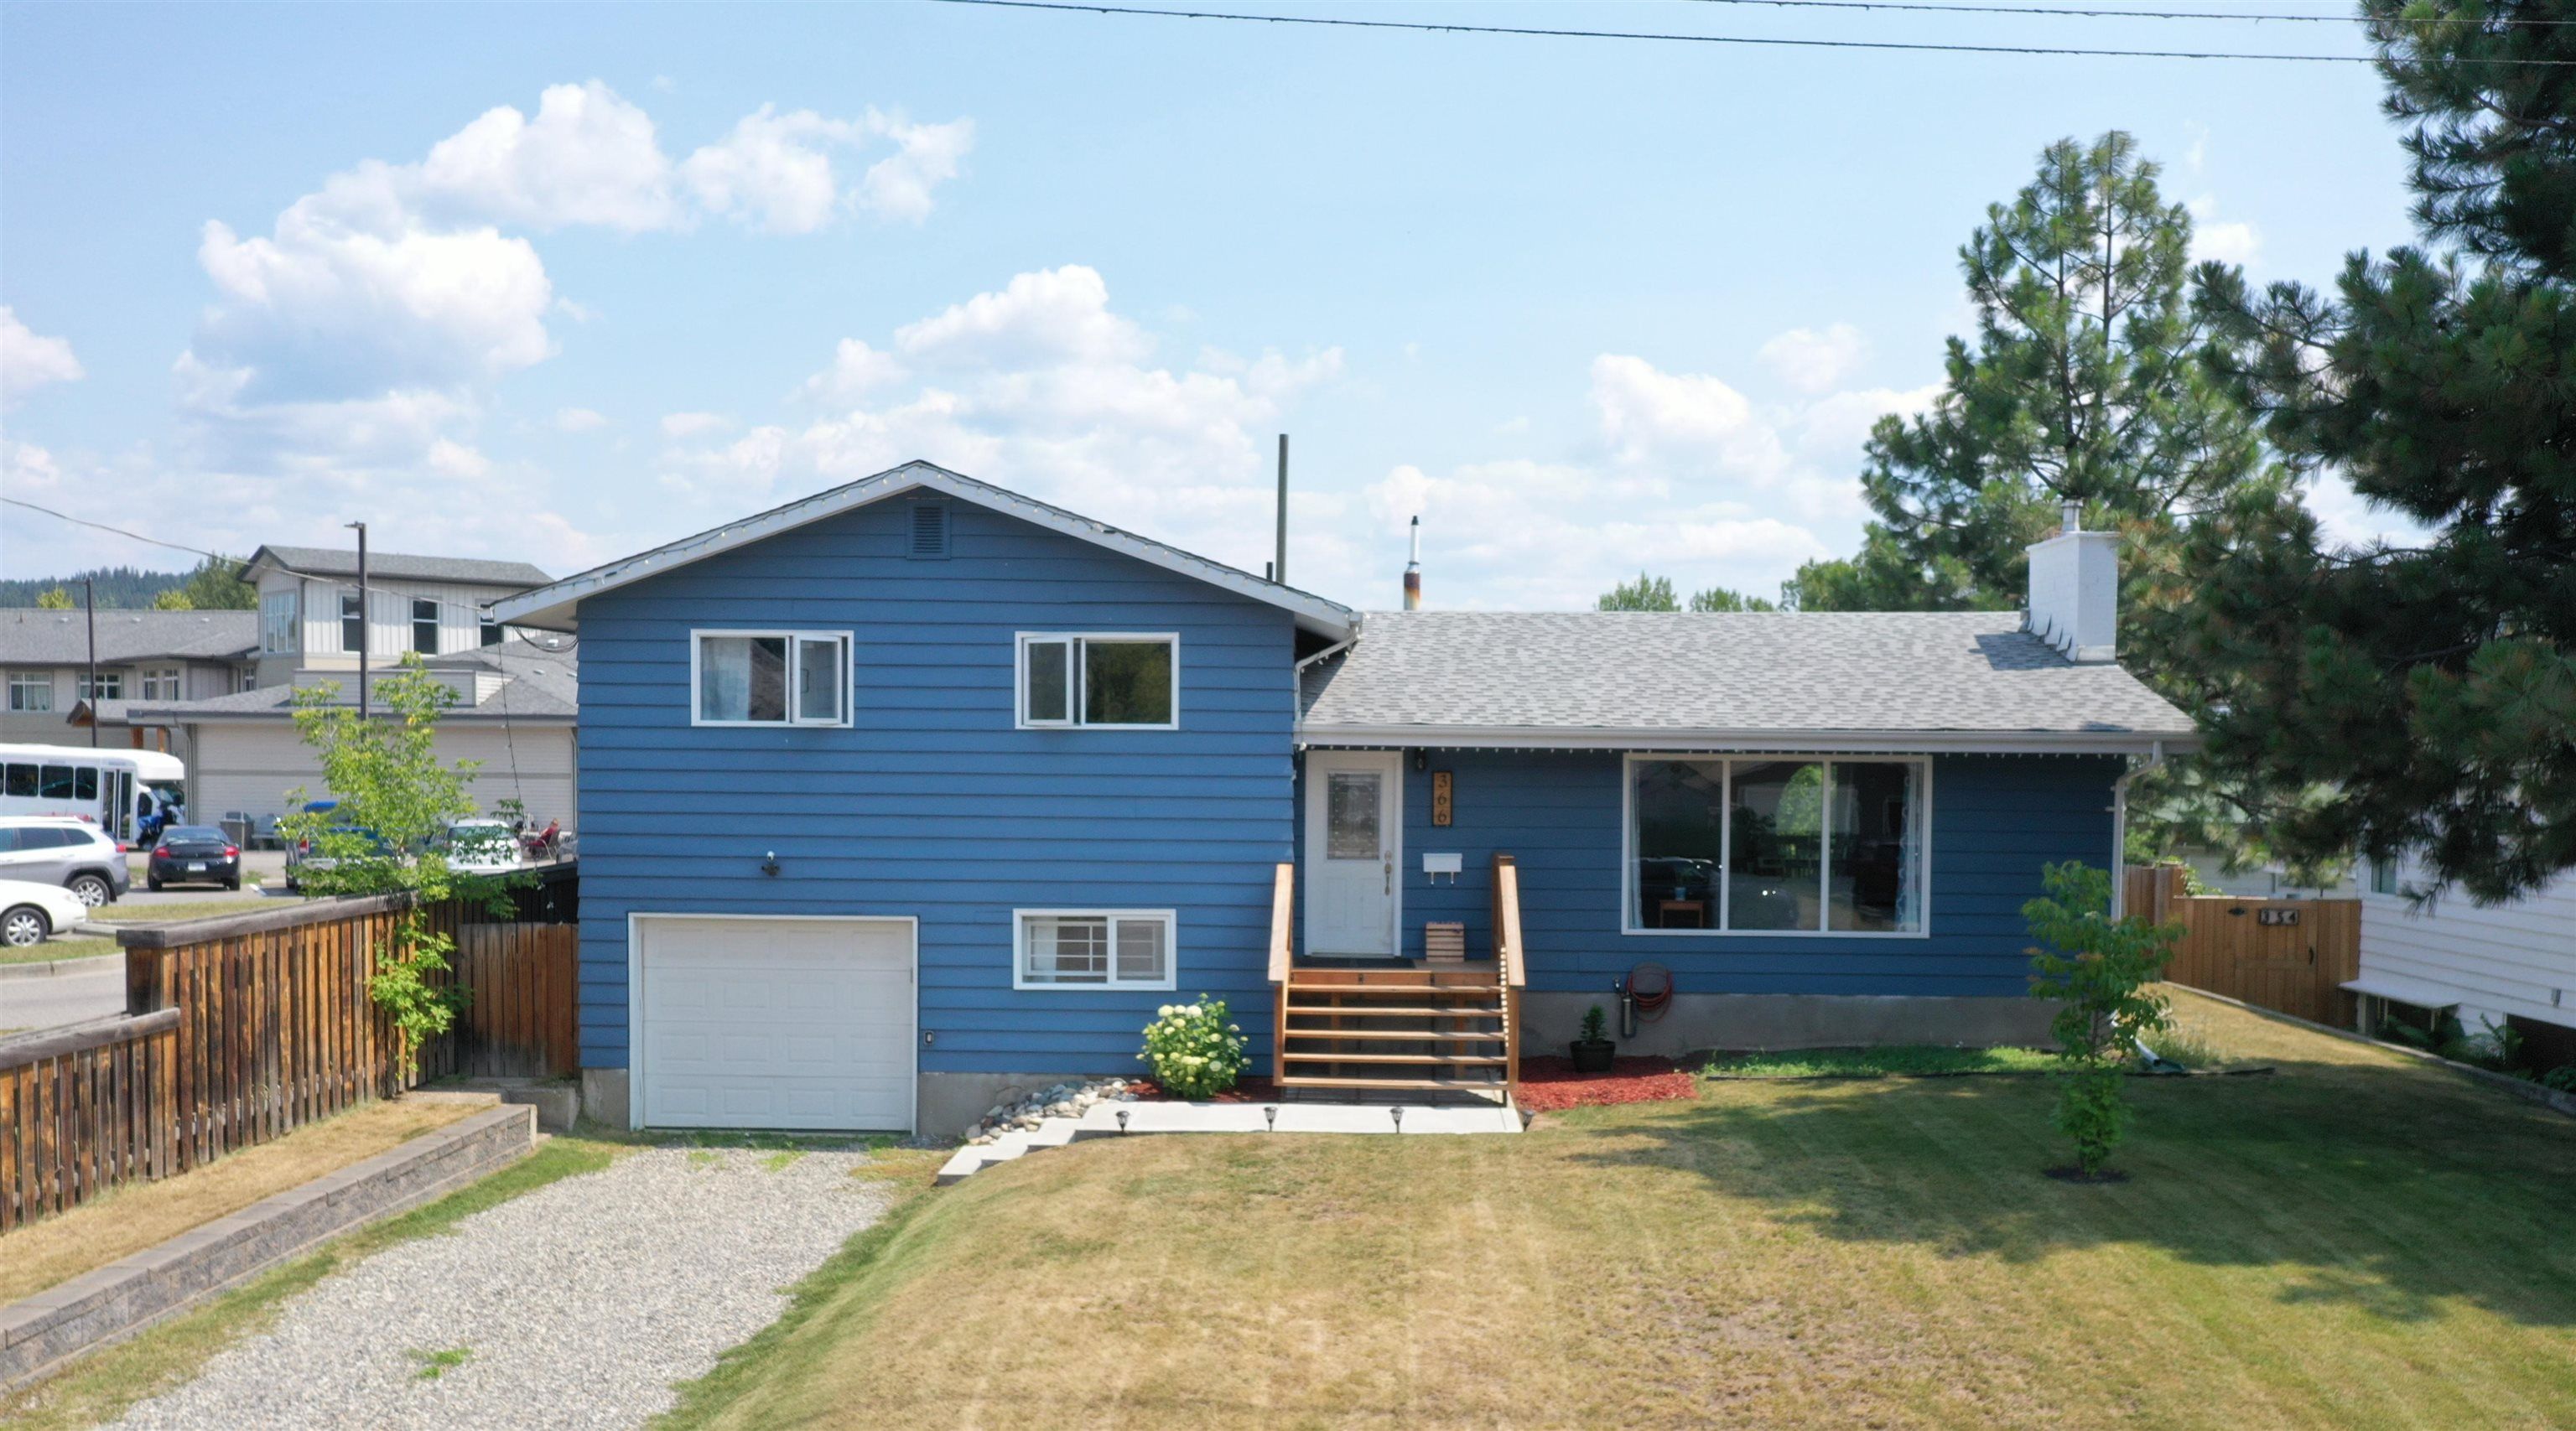 New property listed in Quesnel - Town, Quesnel